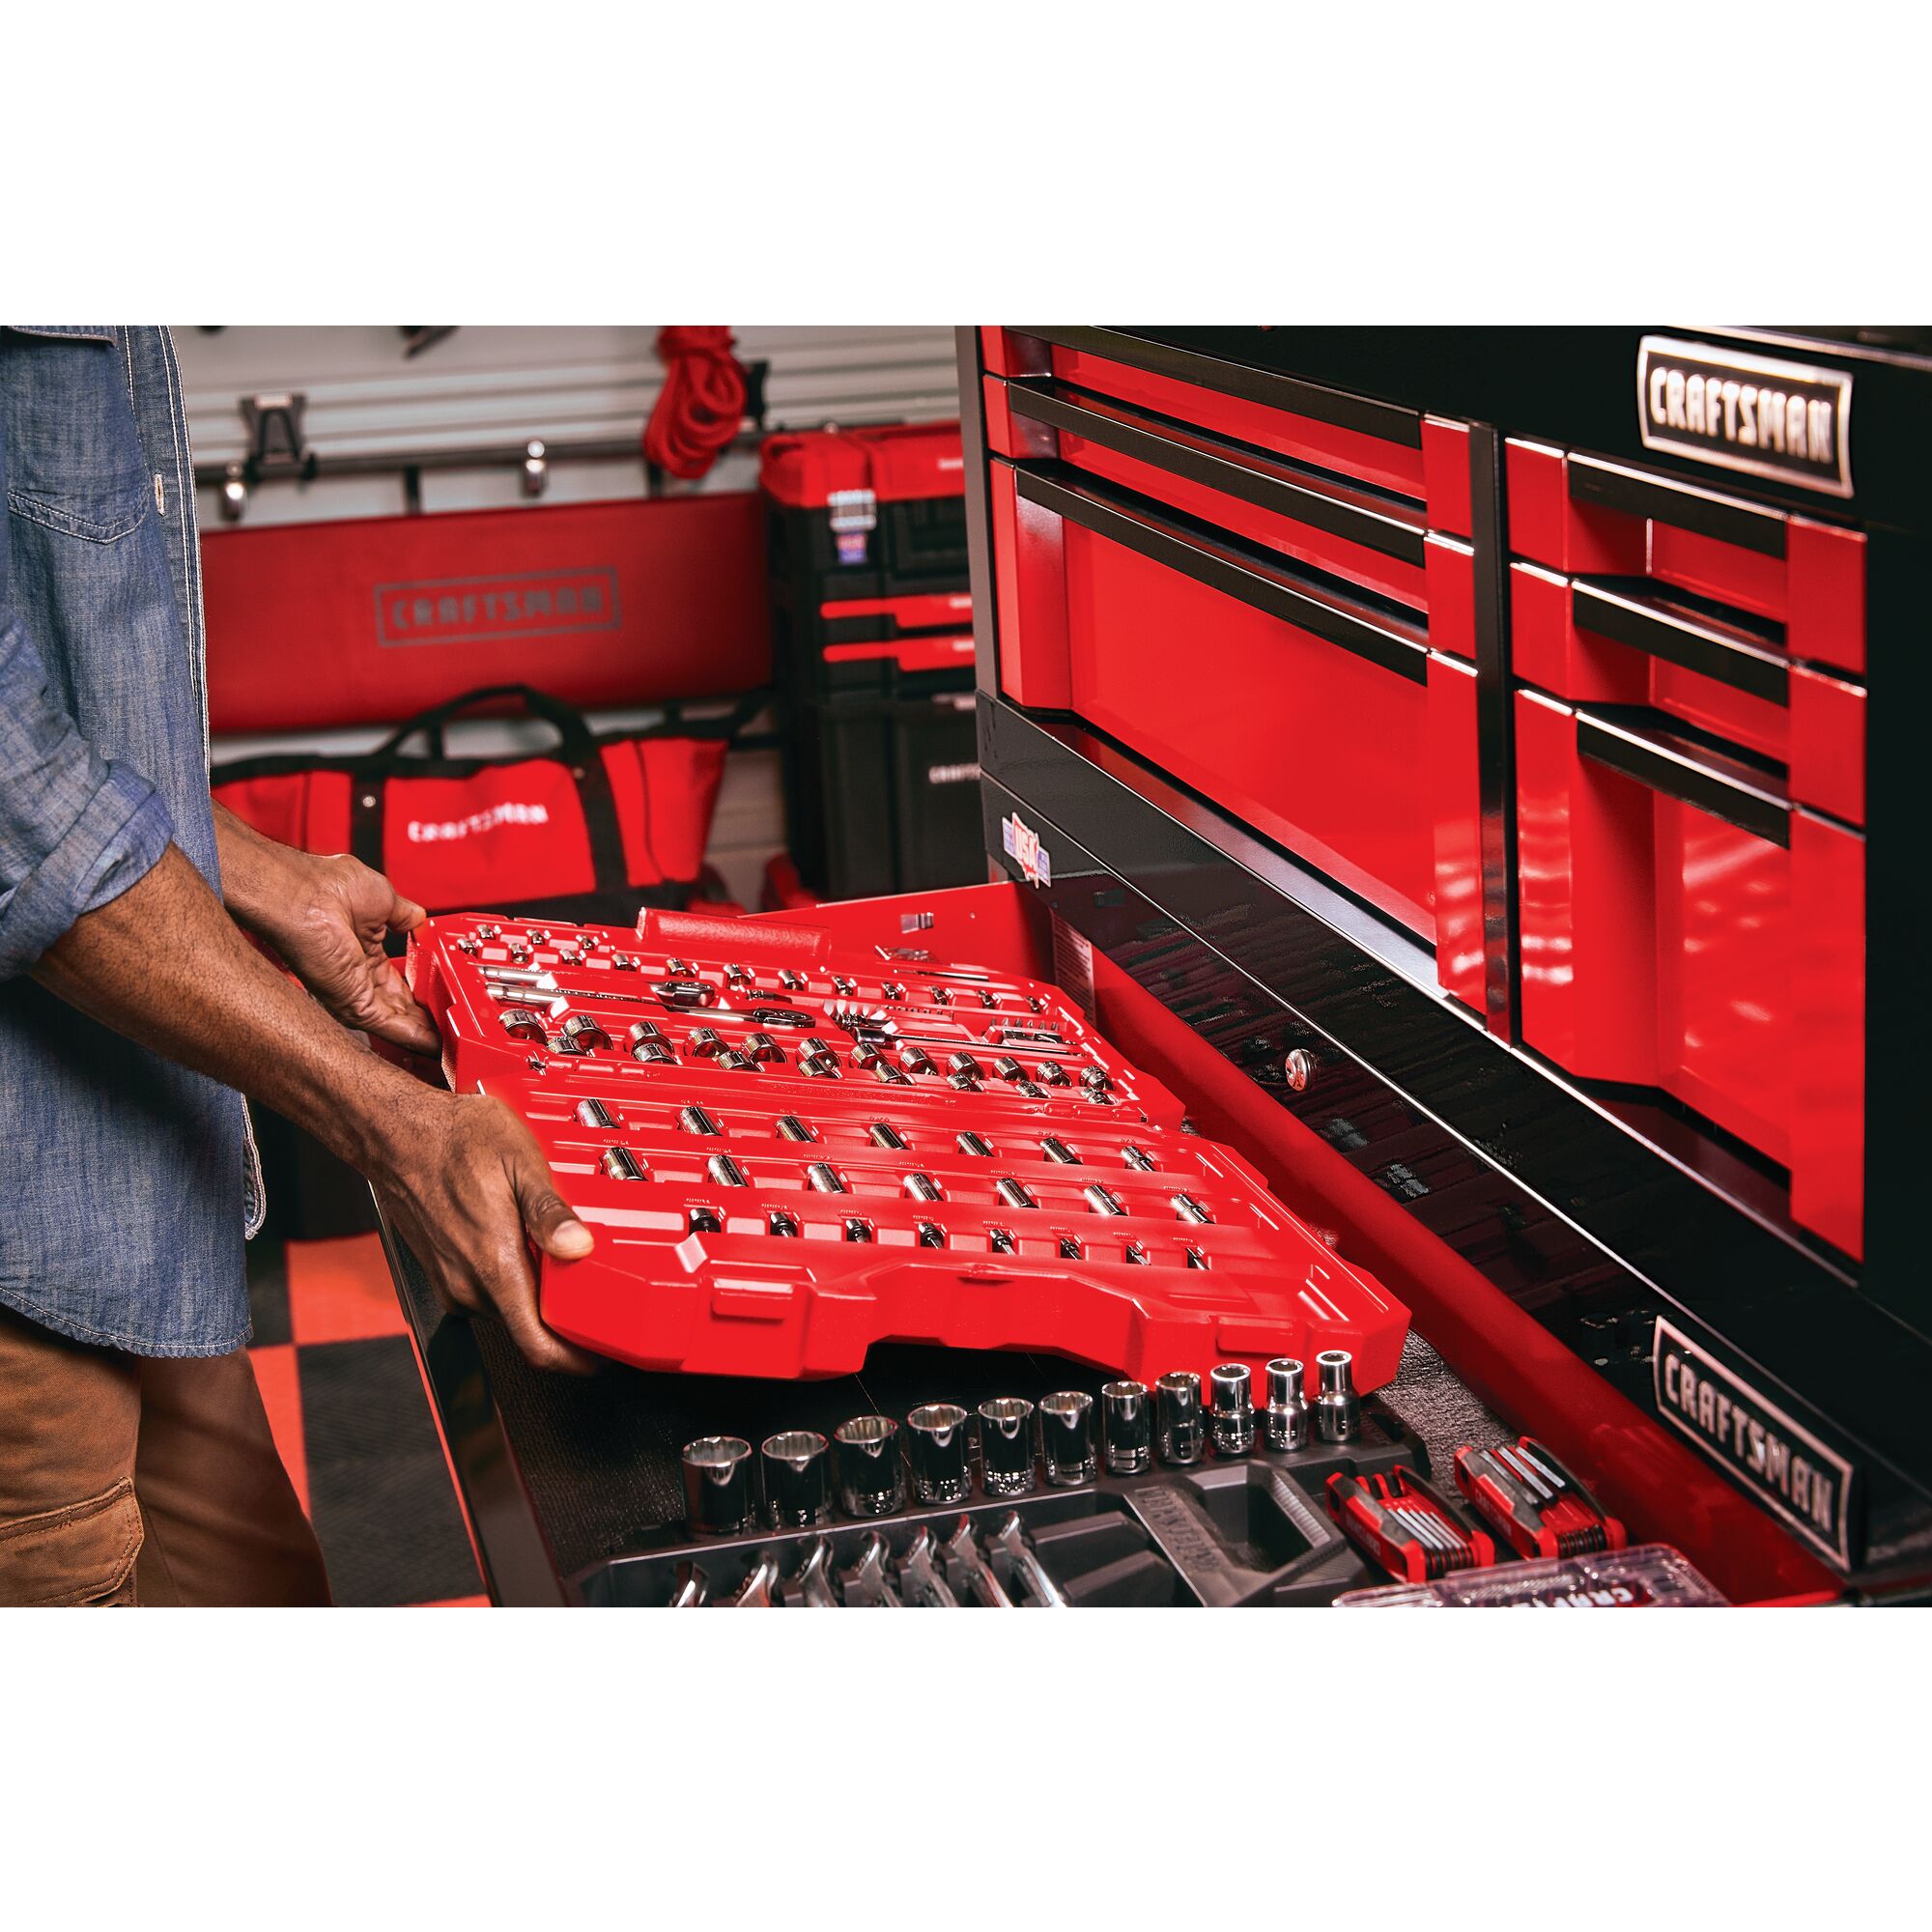 View of CRAFTSMAN Mechanics Tool Set highlighting product features